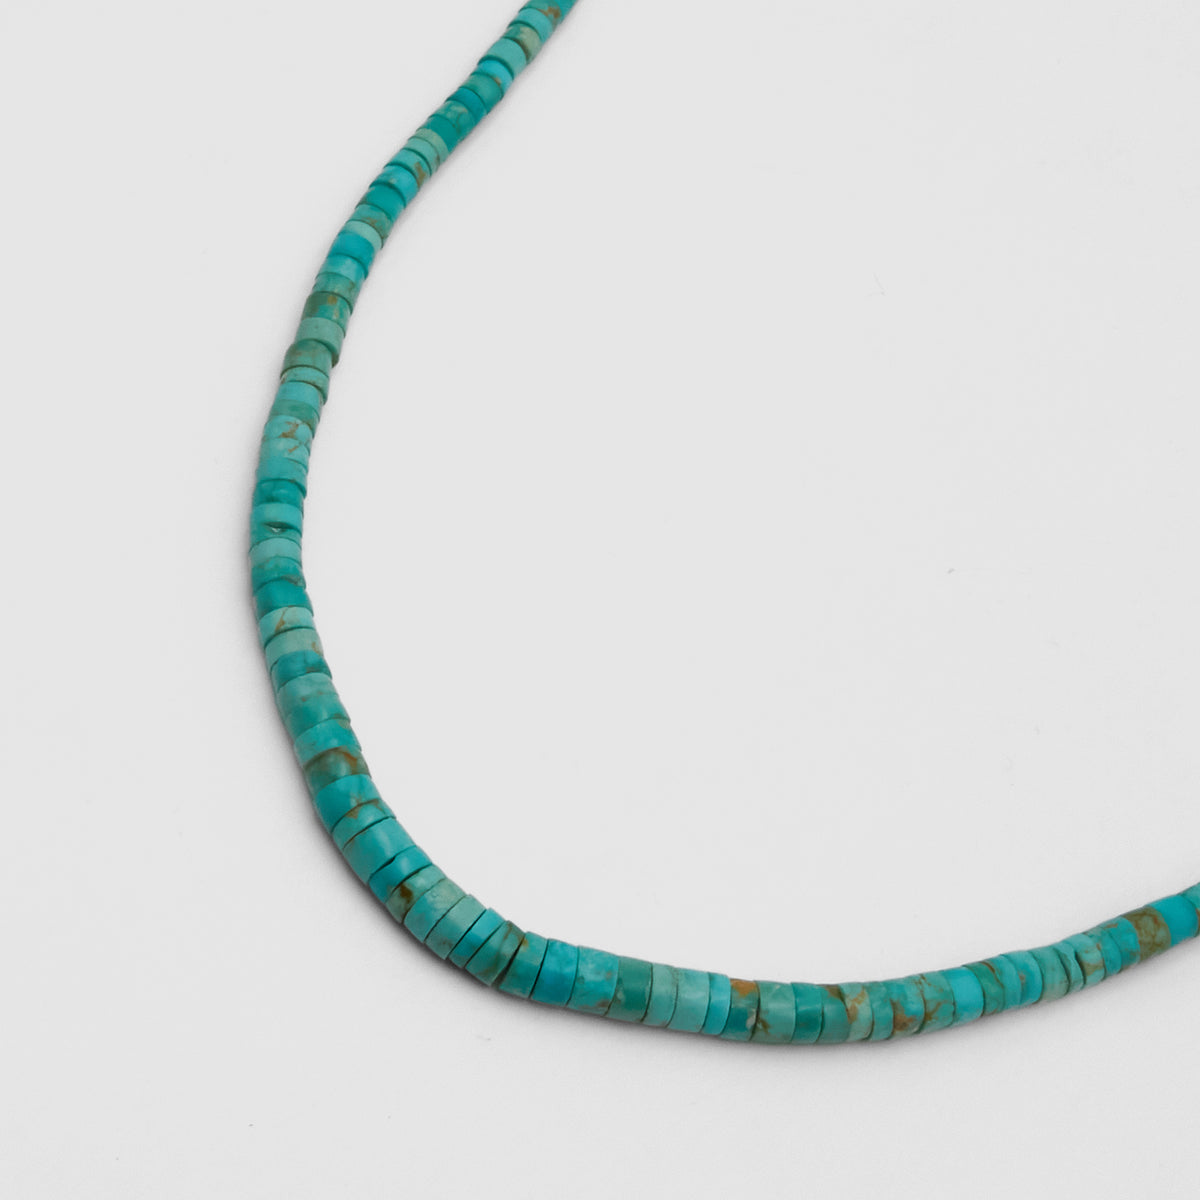 Vintage Jewelry Bright Turquoise Necklace